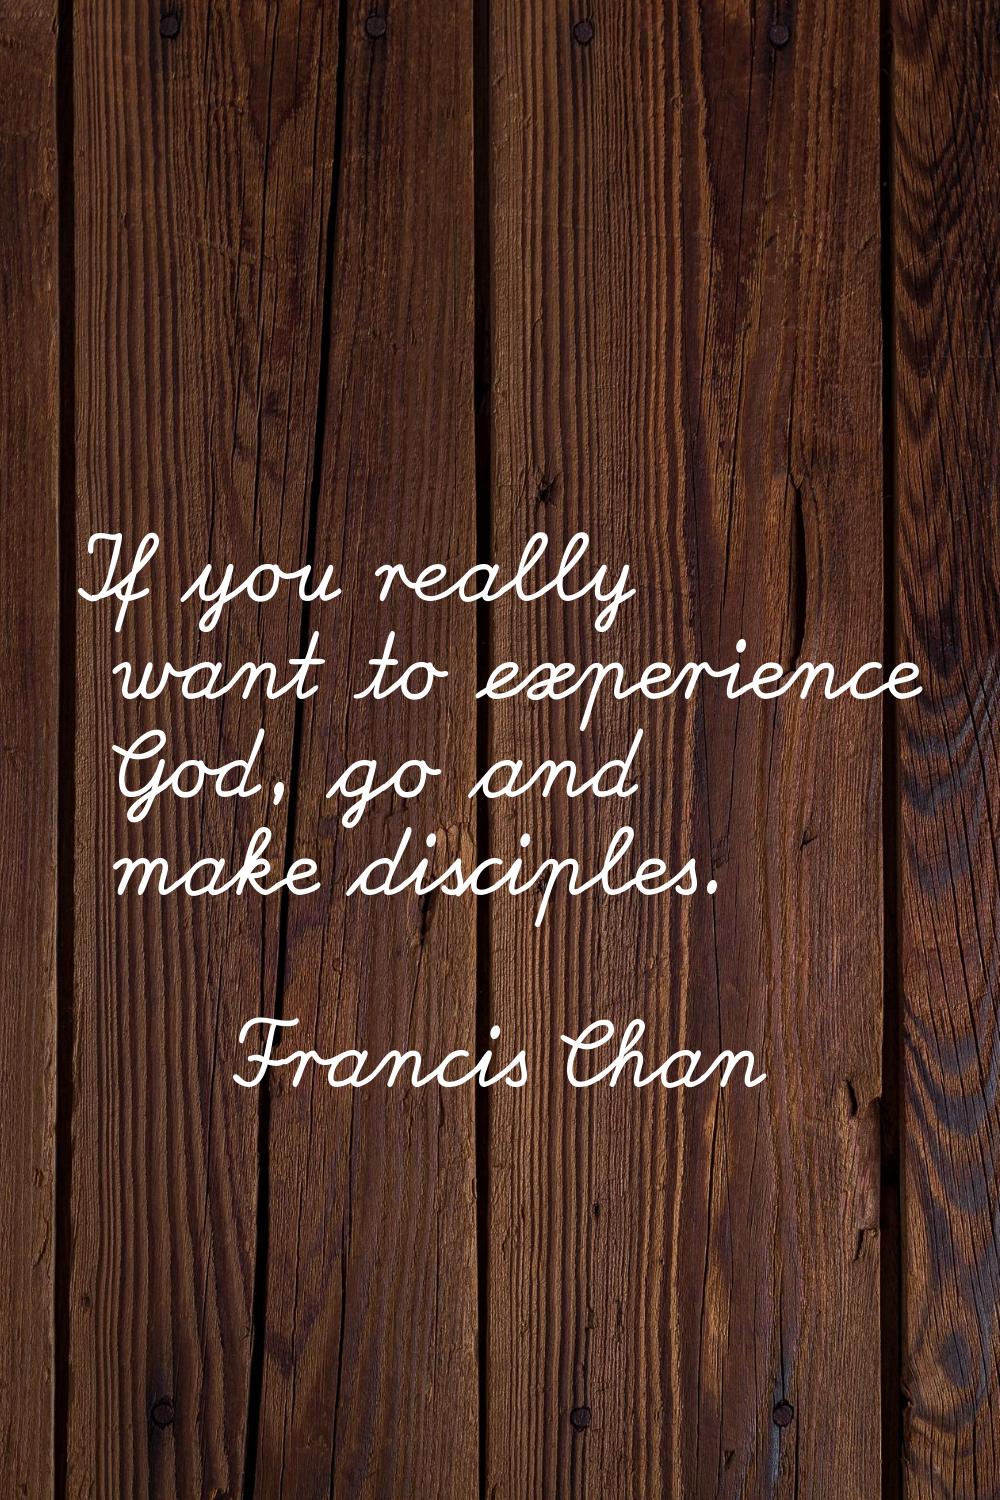 If you really want to experience God, go and make disciples.